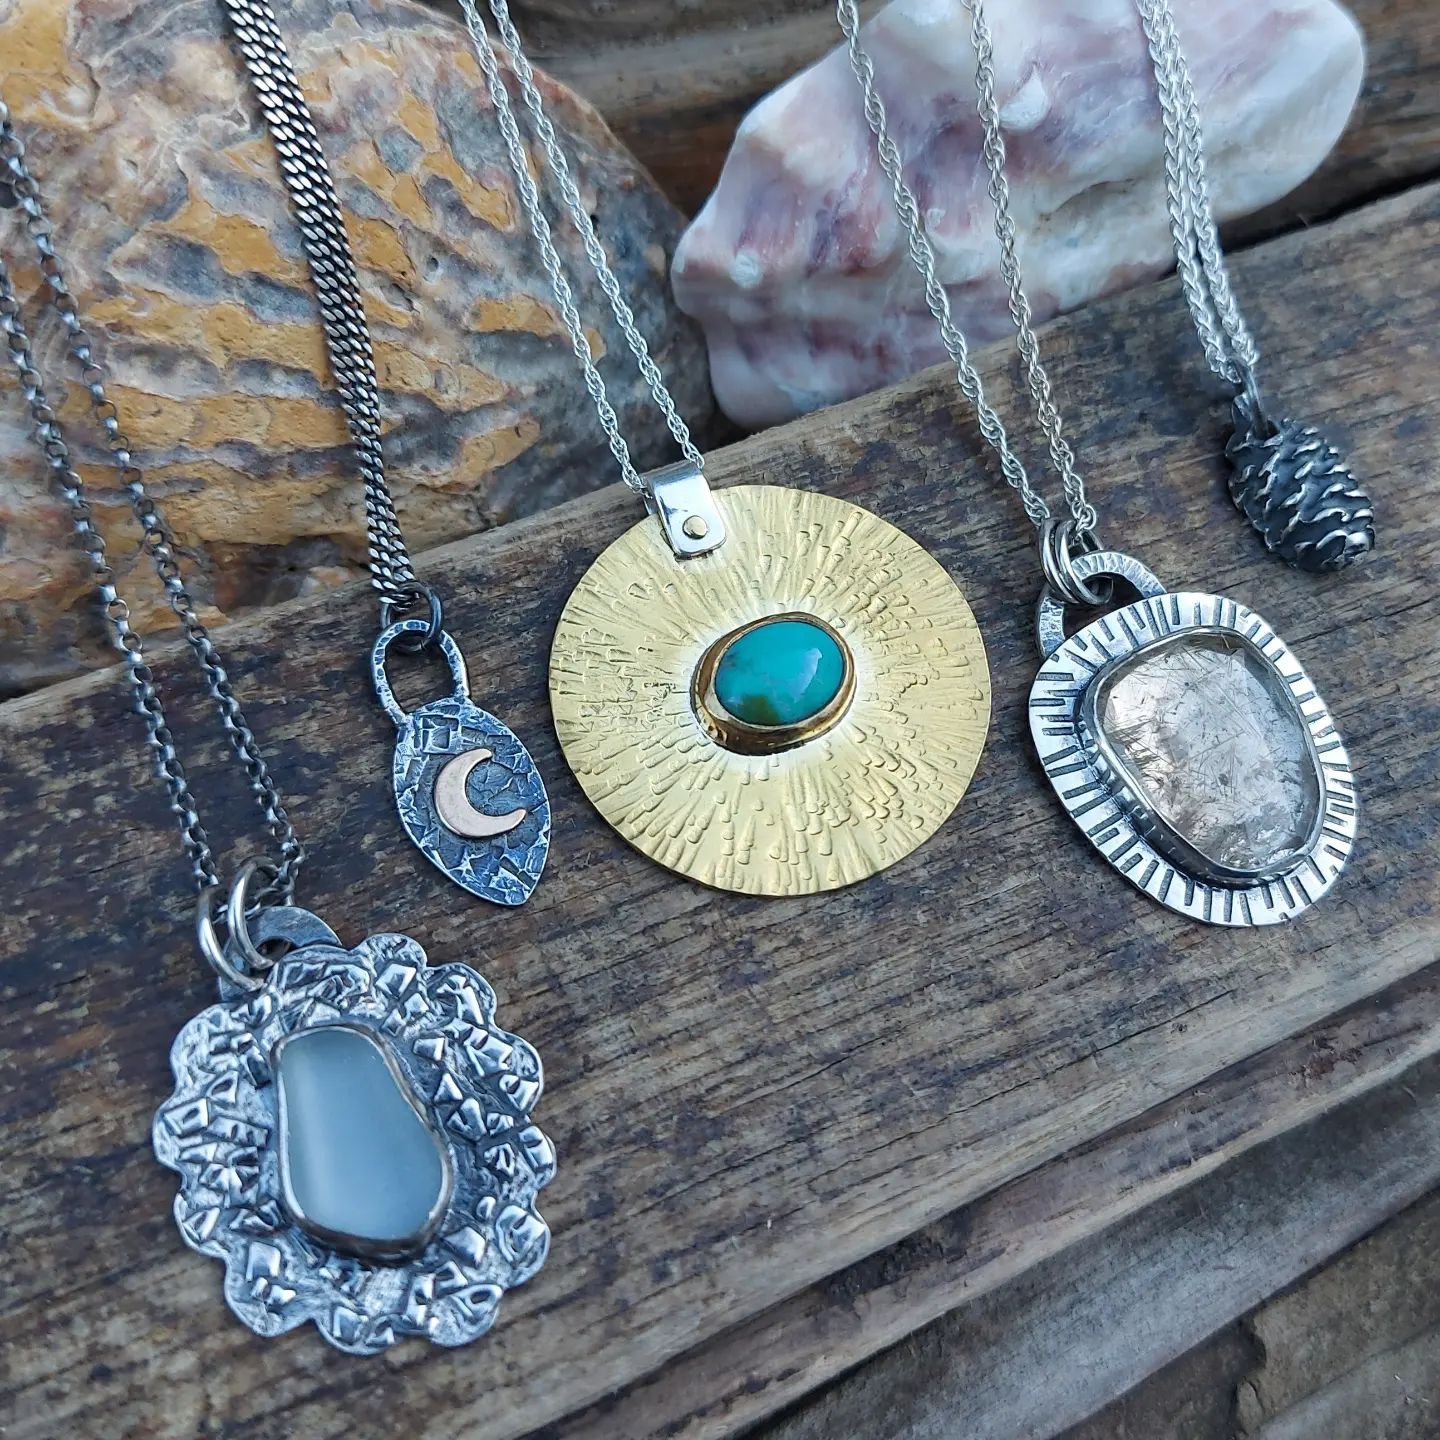 I've been having a sort through some photos tonight and doing some admin. I came across this beautiful shot of five pendants I took a little while ago and thought I'd share it. 

I love the mixture of styles, metals, and processes on display here - g